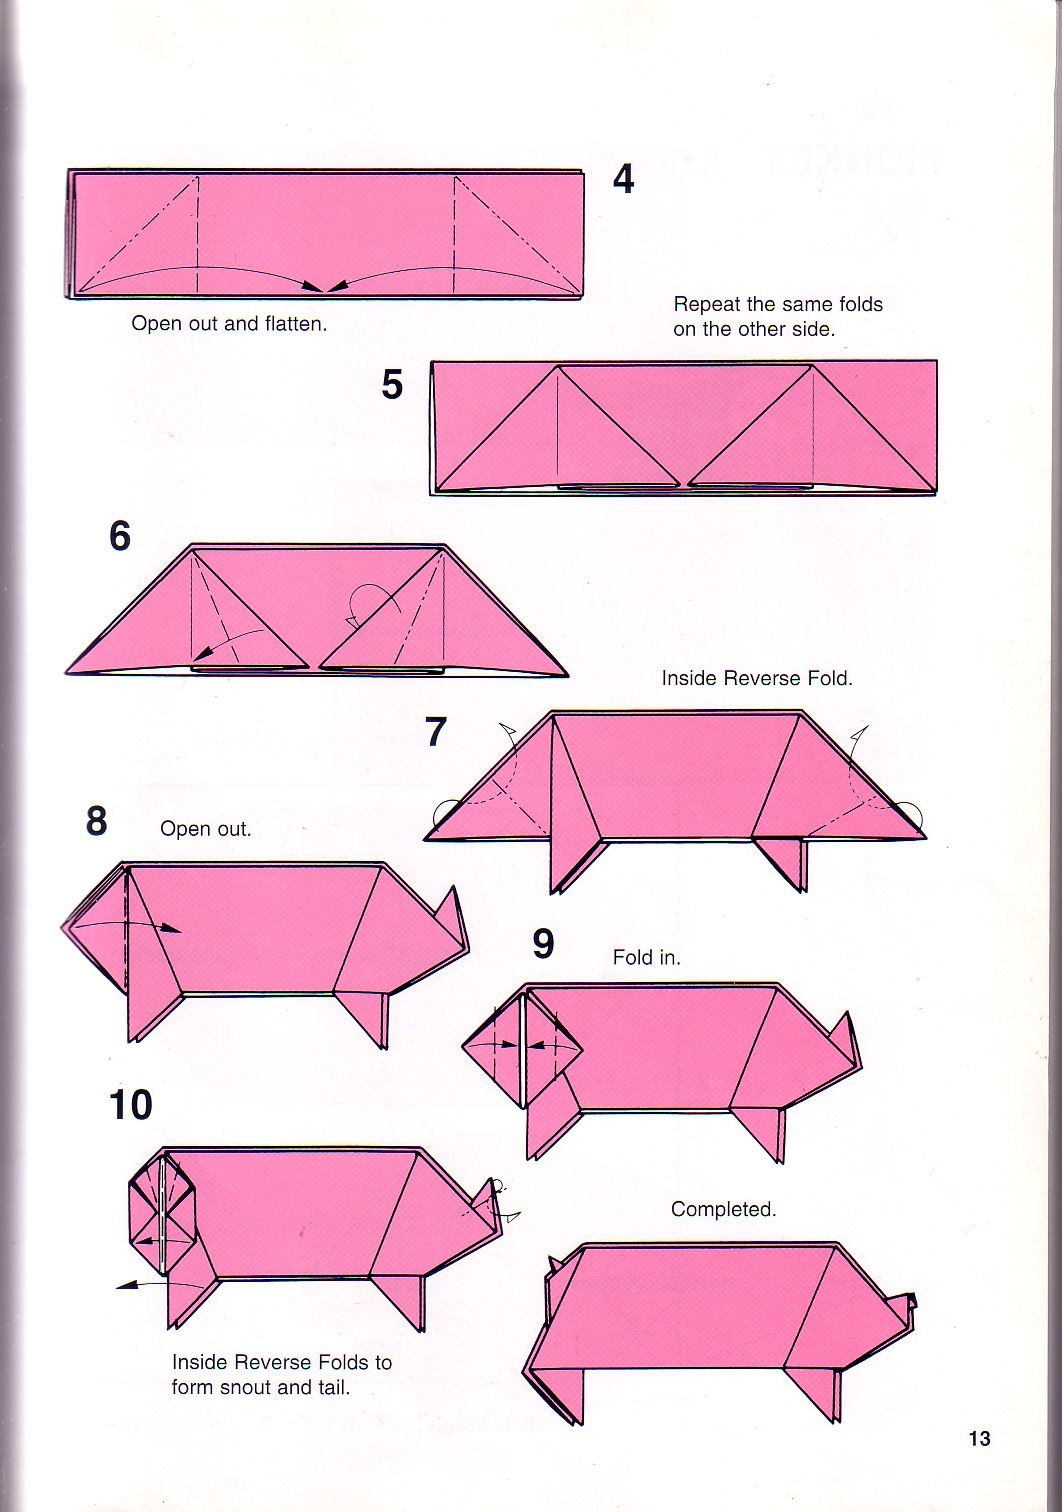 easy-printable-origami-instructions